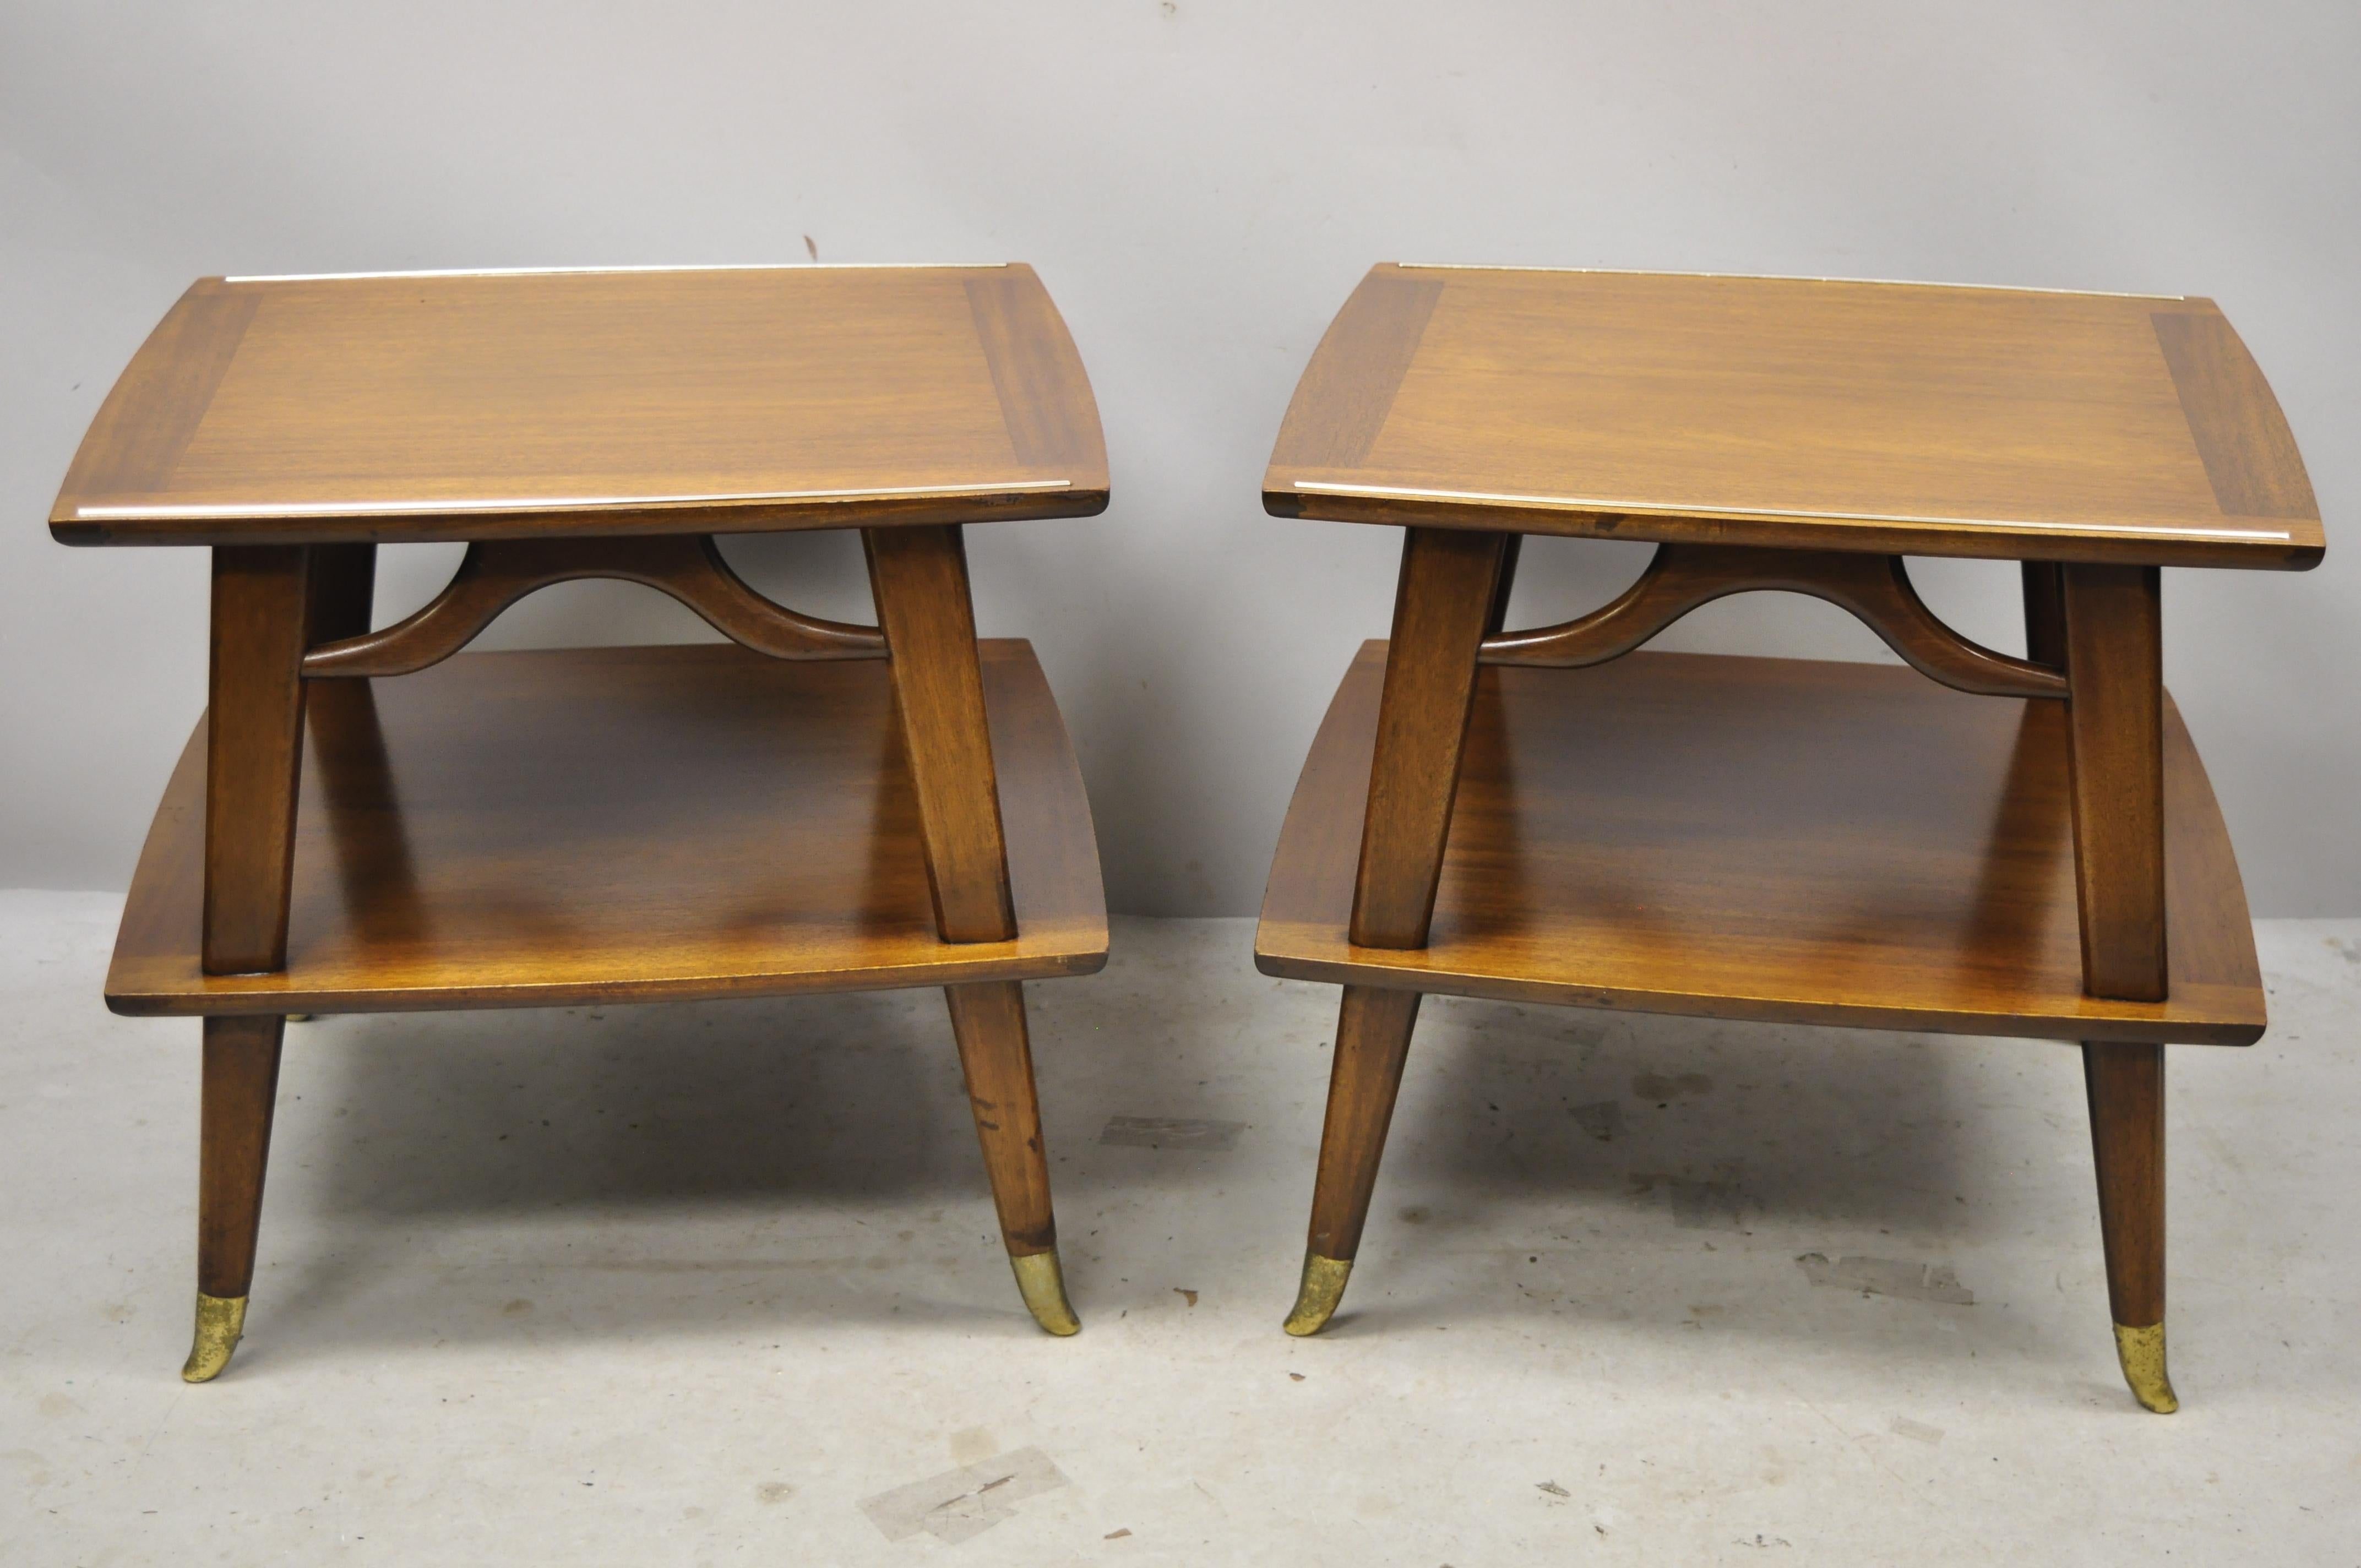 Pair of vintage Mid-Century Modern brass feet sculpted walnut 2-tier side end tables. Item features metal capped brass plated feet, lower shelf/tier, beautiful wood grain, nicely carved details, tapered legs, very nice vintage pair, sleek sculptural